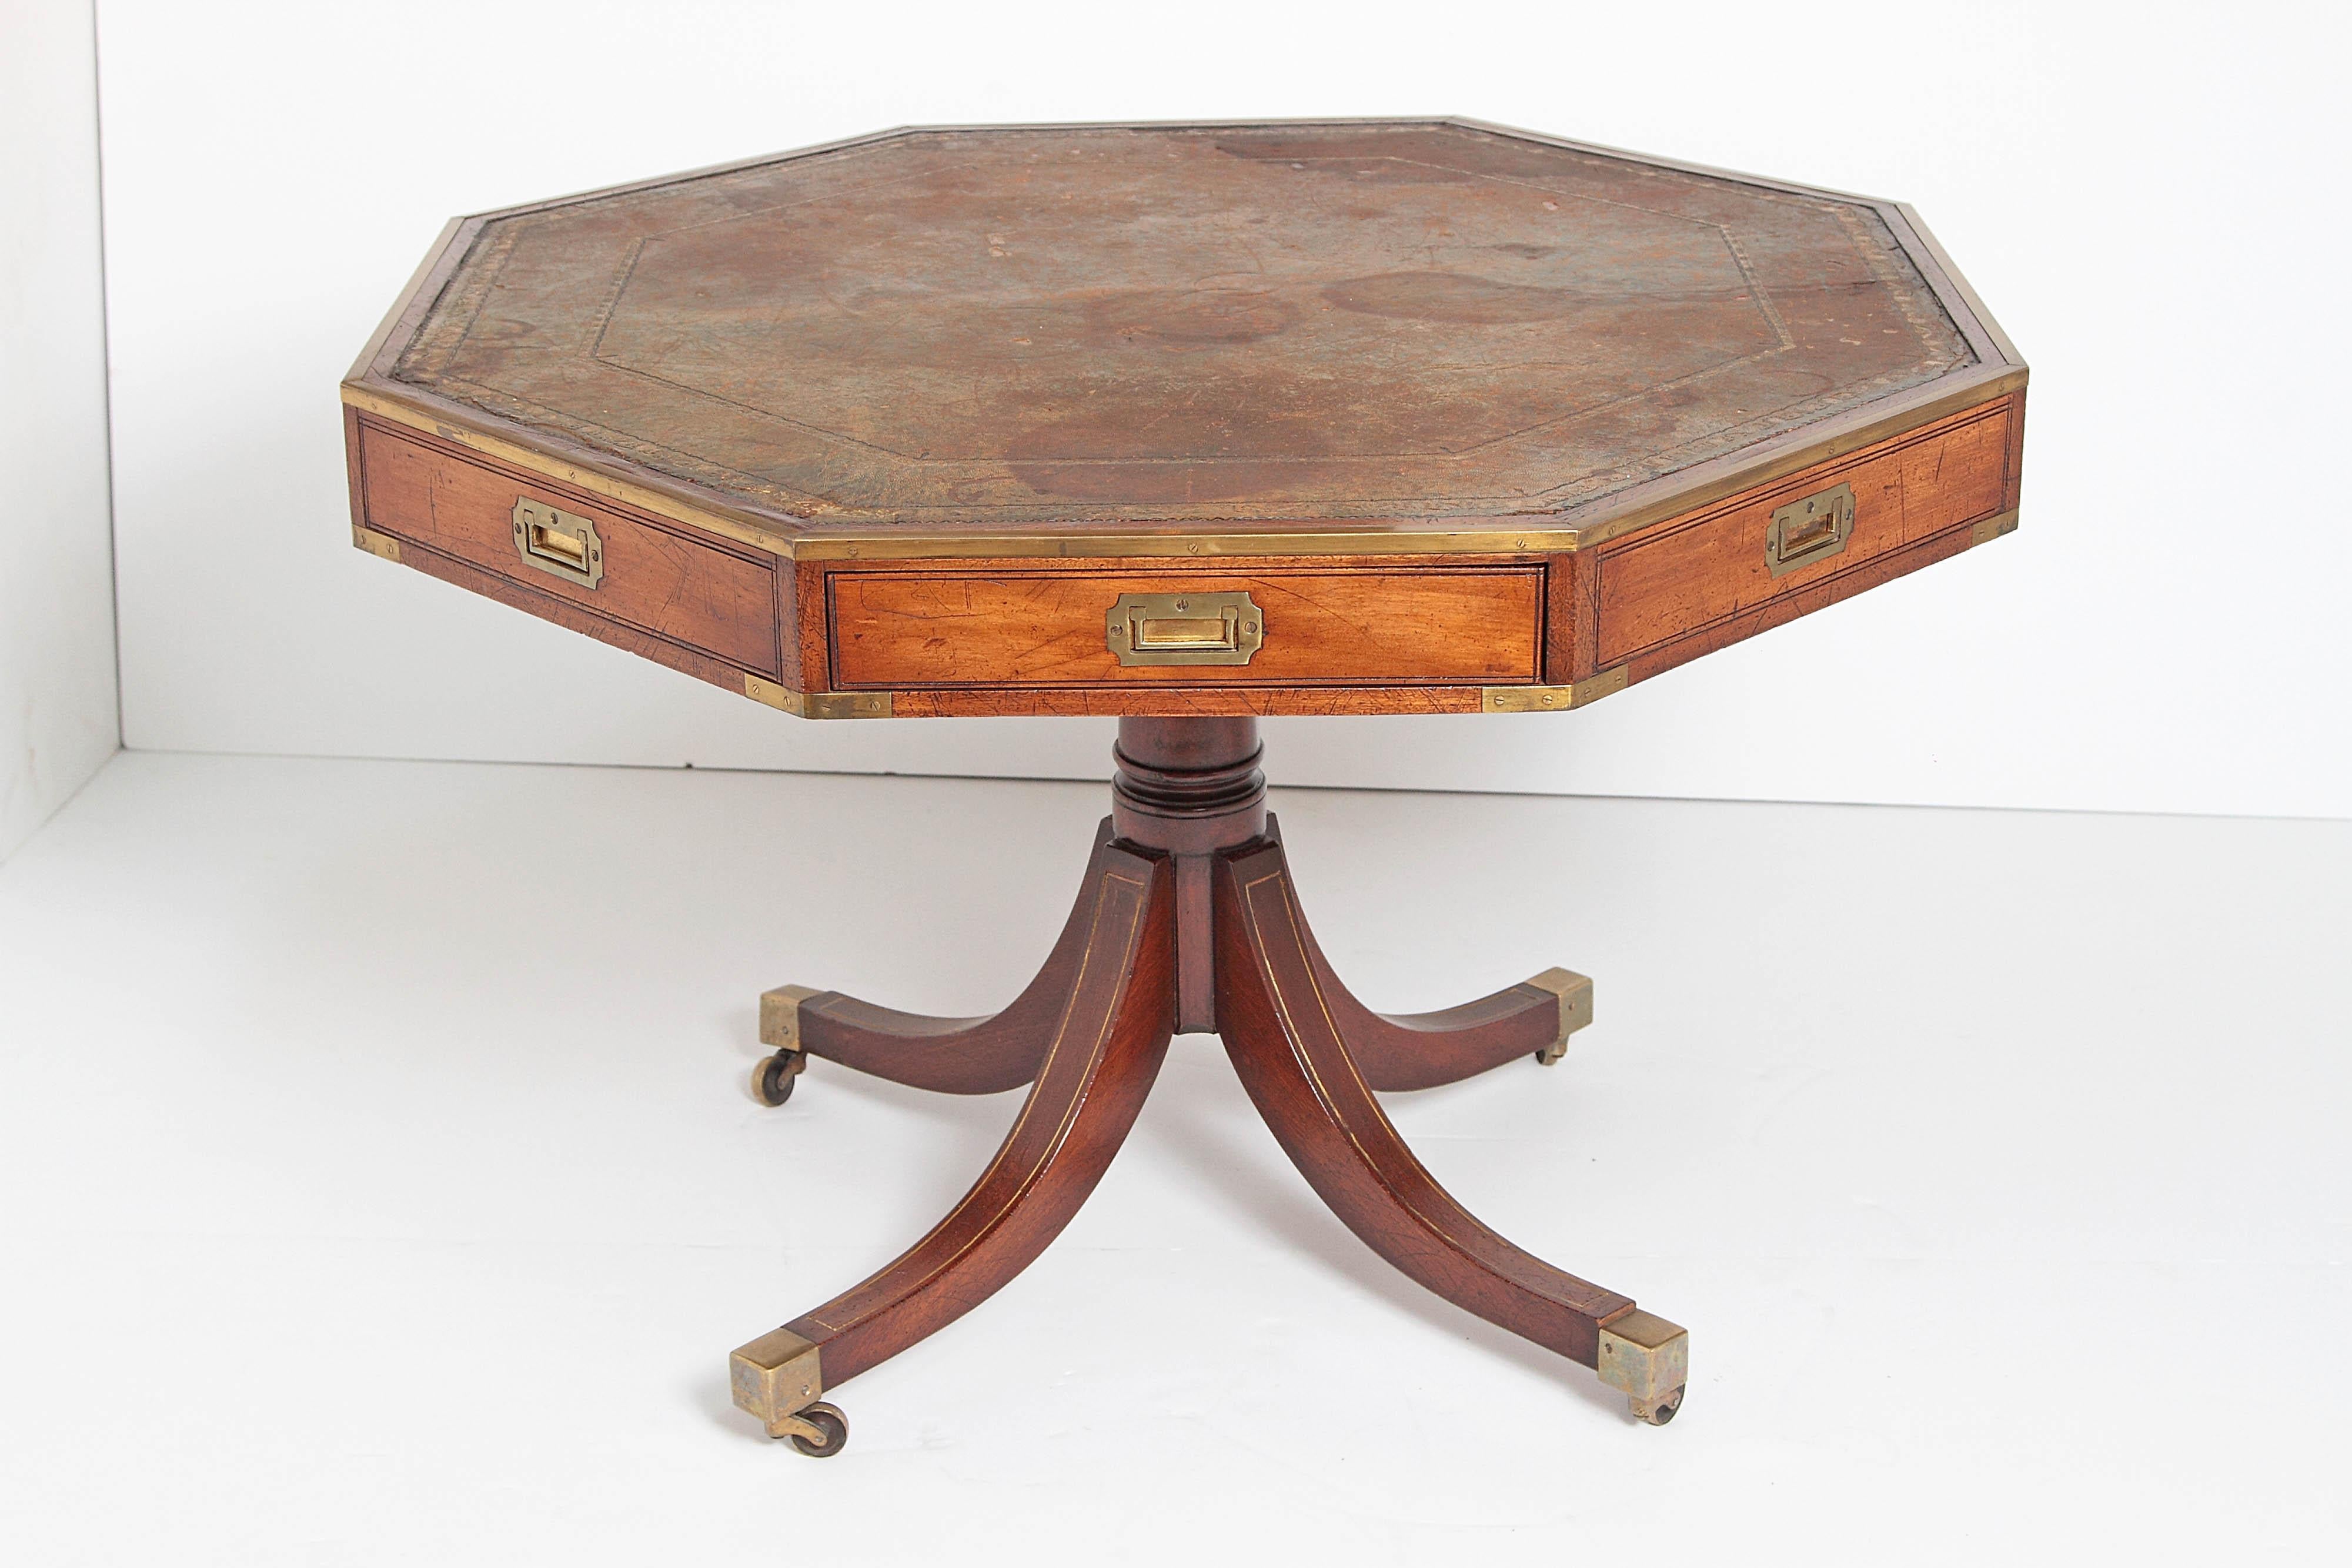 Cast English Regency Drum Table with Brass Campaign-Style Hardware / Fittings